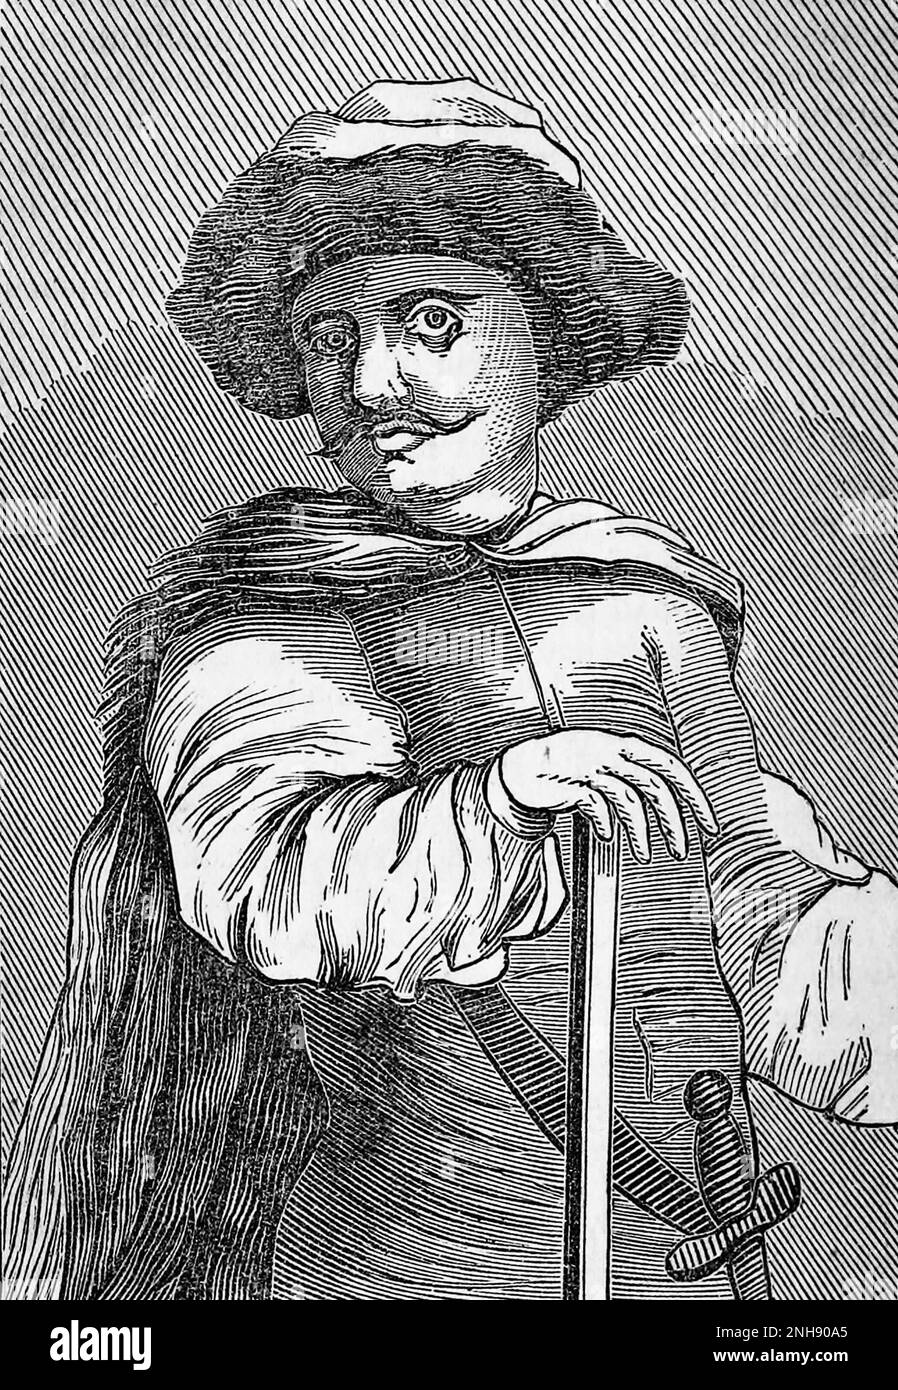 Henry Morgan (1635-1688) was a Welsh privateer, plantation owner, and, later, Lieutenant Governor of Jamaica. Illustration from The Buccaneers of America, 1851. Stock Photo